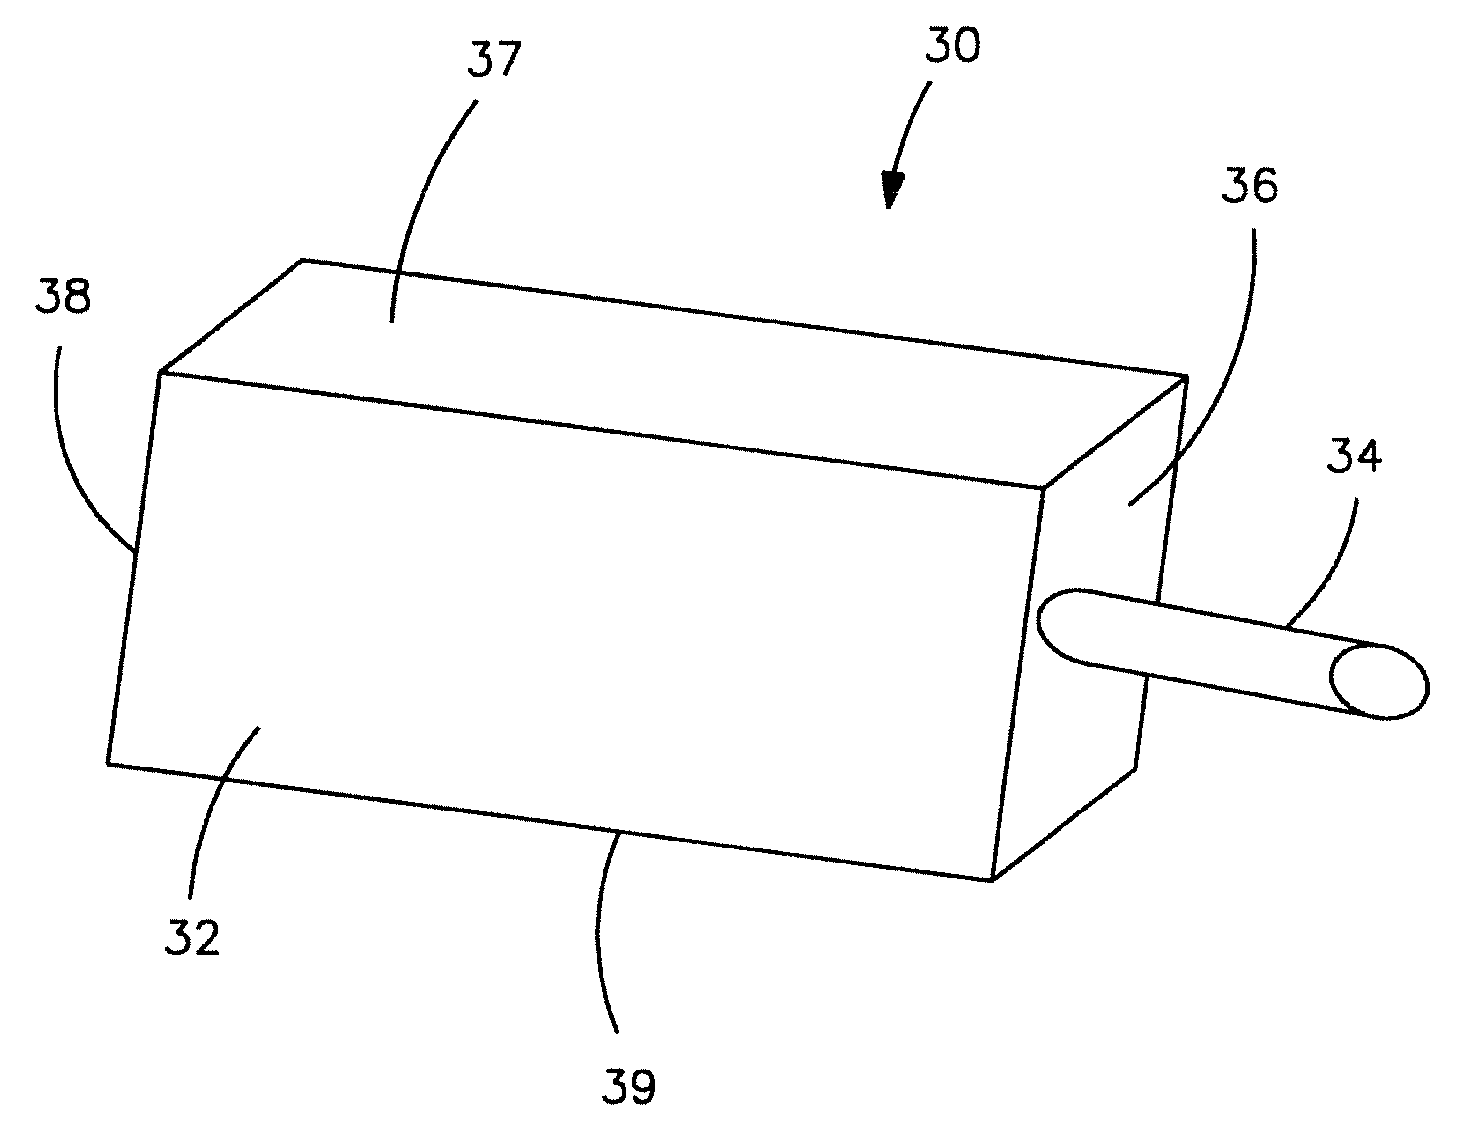 Sintered Anode Pellet Etched with an Organic Acid for Use in an Electrolytic Capacitor